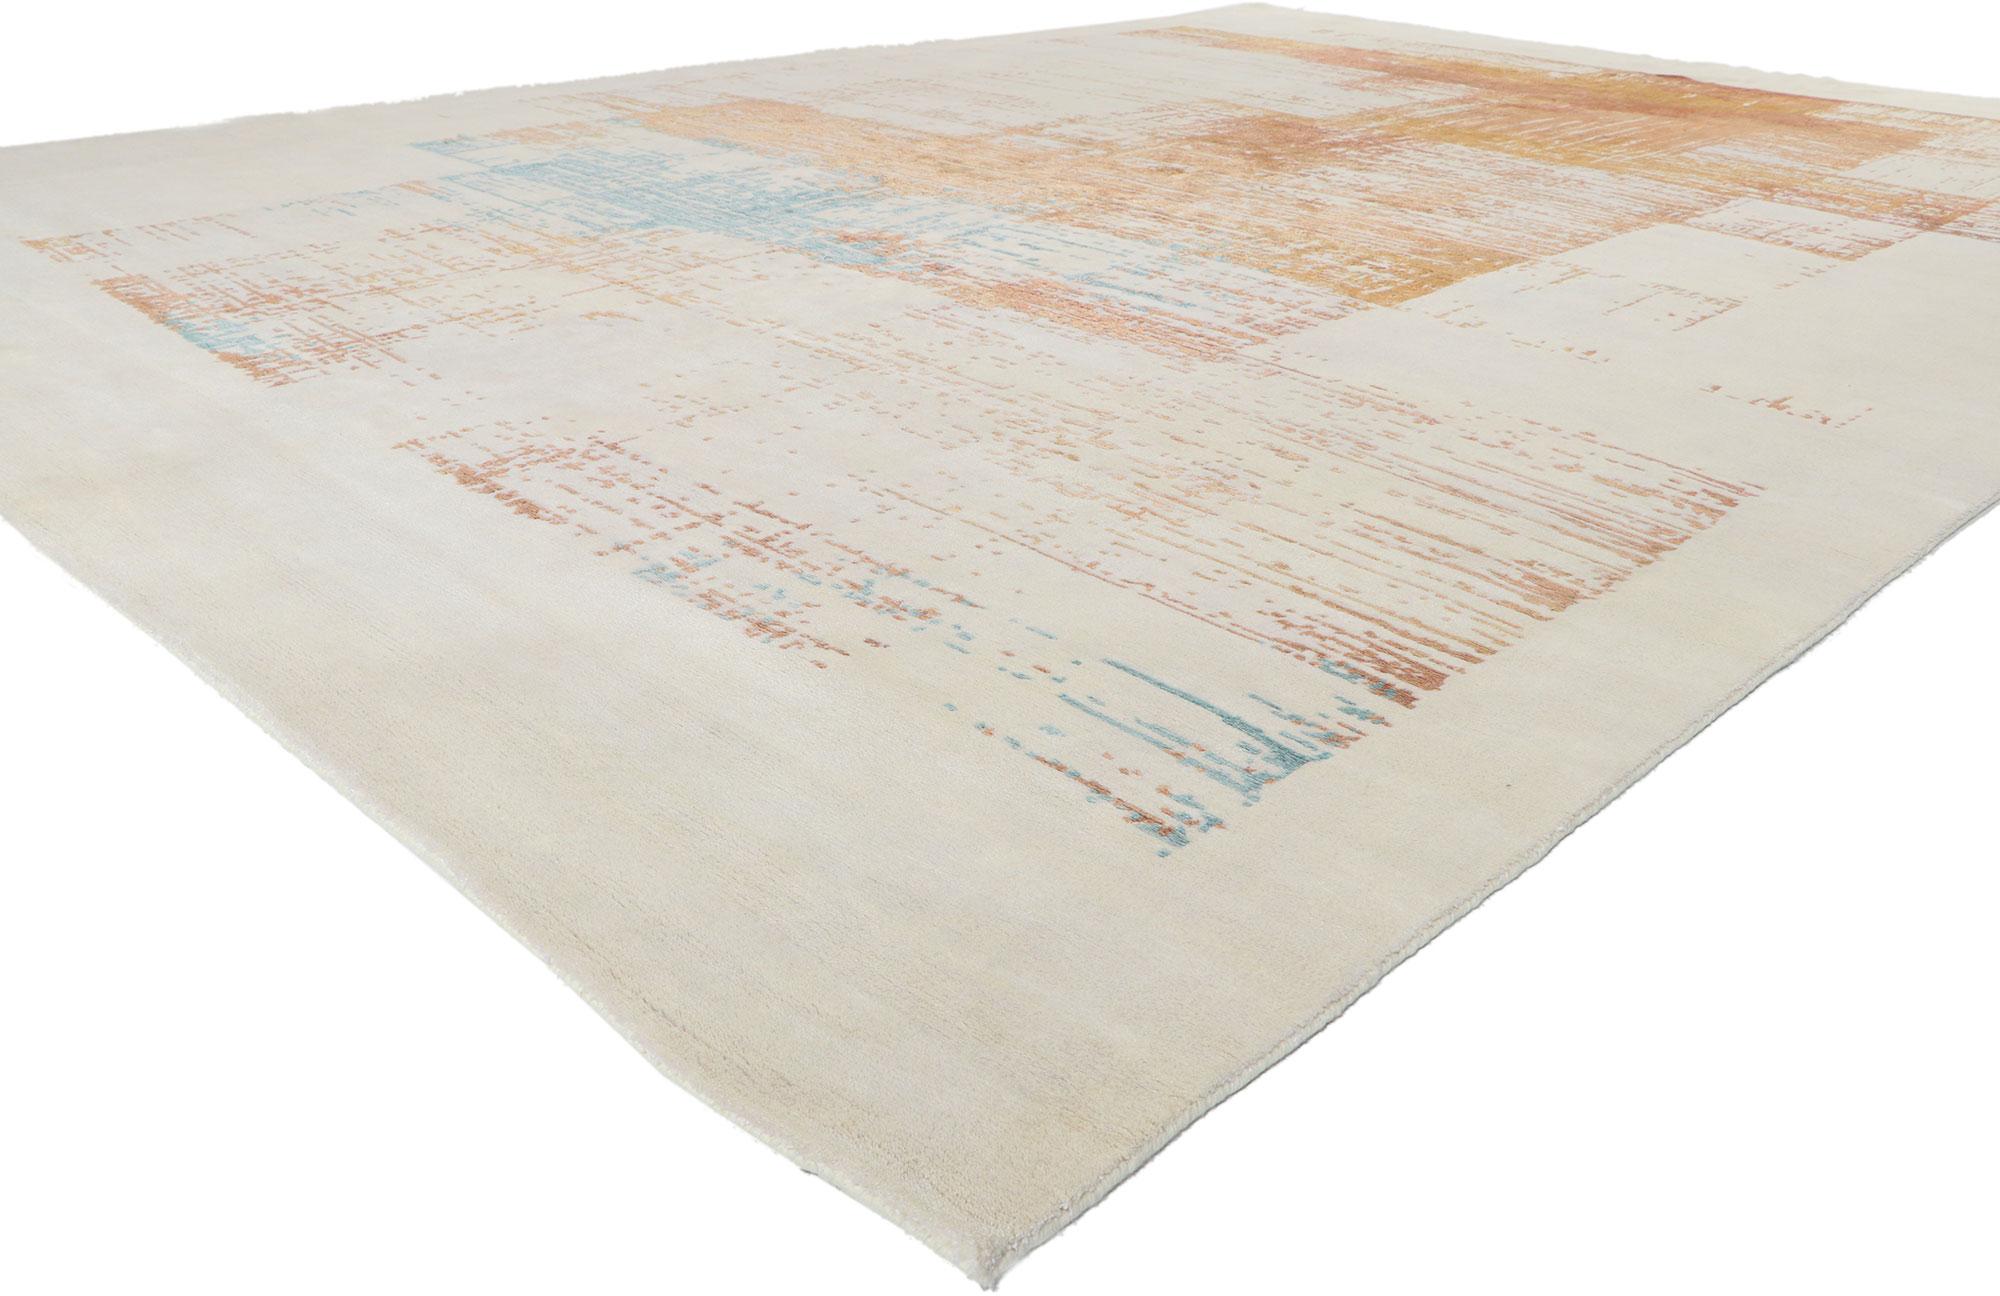 30890 New Contemporary abstract rug inspired by Helen Frankenthaler, 10'01 x 14'02. Showcasing a modern style and raised silk design with incredible detail and texture, this hand knotted contemporary textured rug is a captivating vision of woven